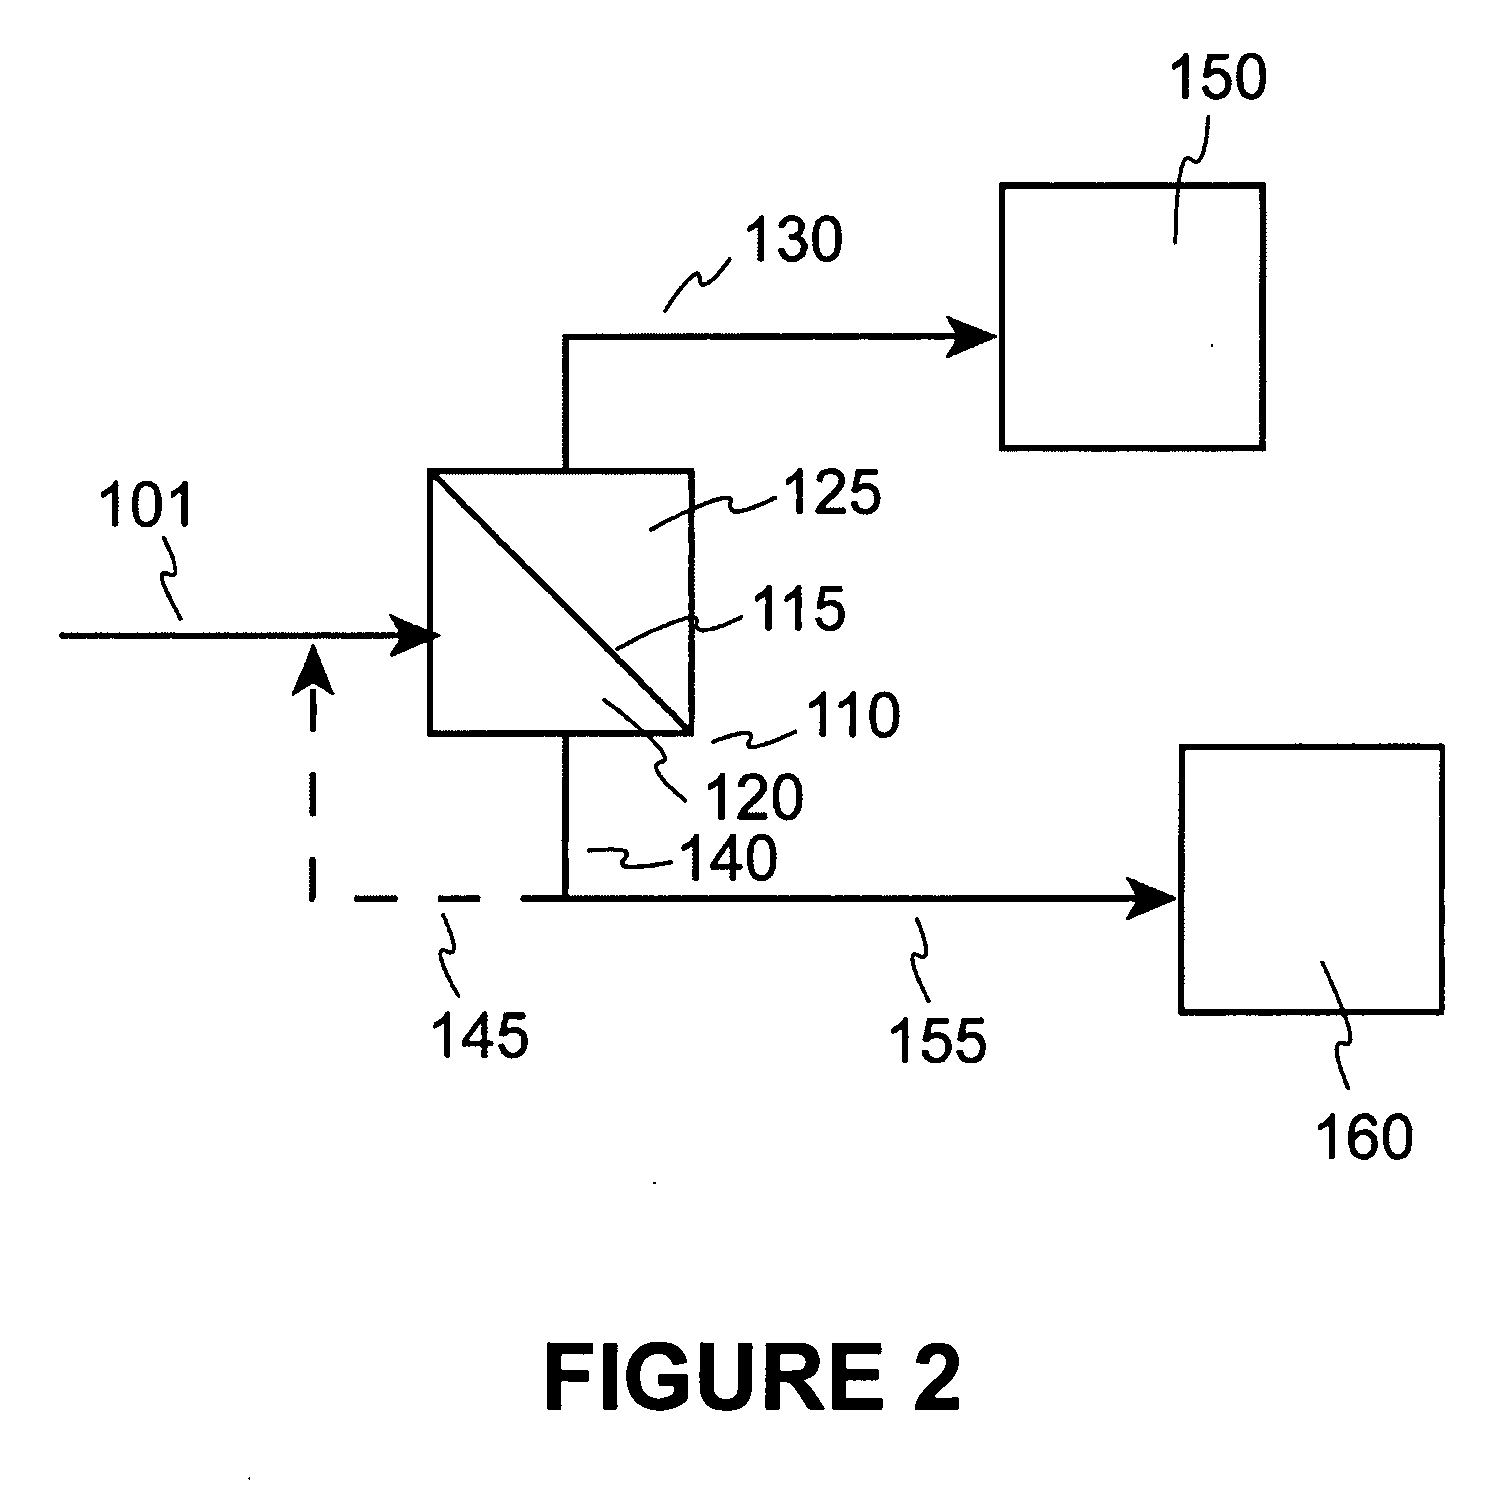 Process for separating a heavy oil feedstream into improved products